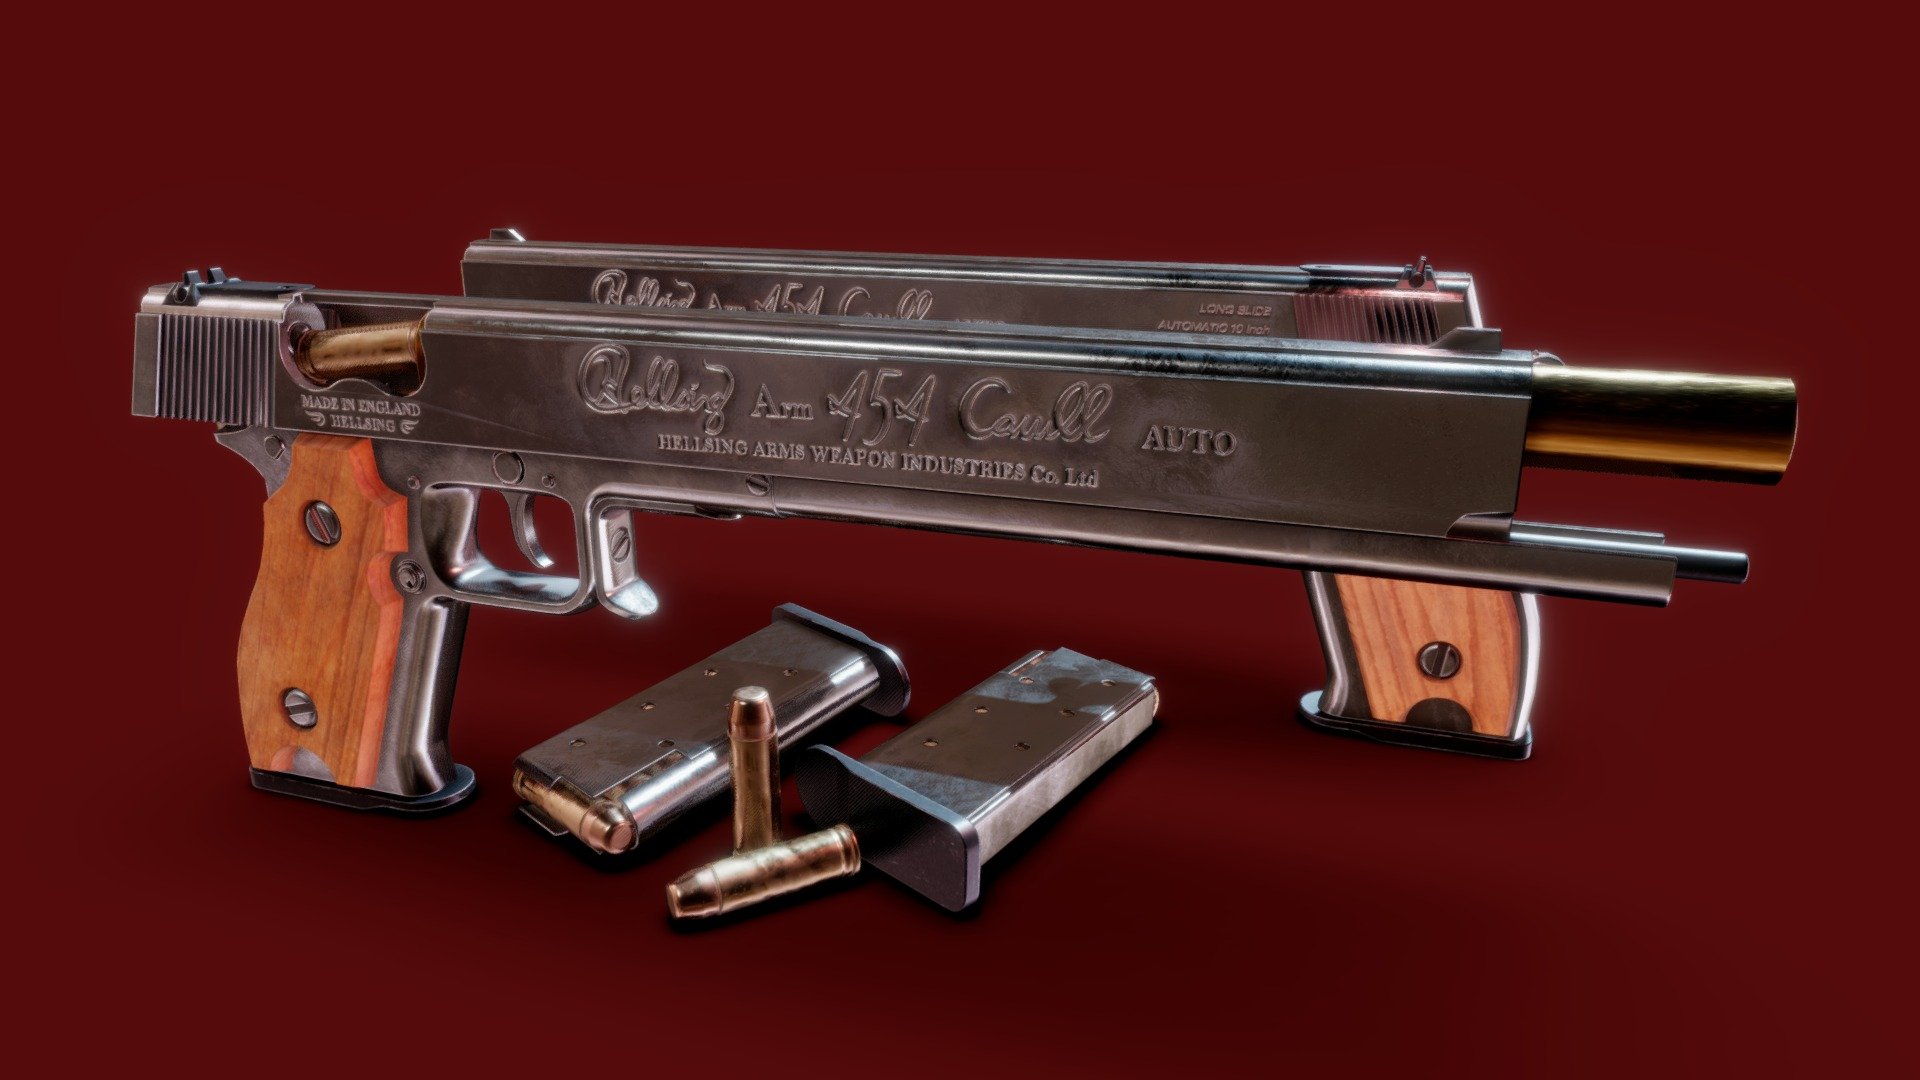 This is my own recreation of the 454 Casull from Hellsing! The form overall is fairly simple, but I had some difficulty with this mostly from the dificulty in finding consistent references, even with official art from both the OVA and original series of Hellsing and snipits from the Manga, this gun has a lot of subtle inconsistencies. One such inconsistency is the squareness of the slide. I had seen official art where the slide takes on a shape more similar to a 1911 pistol, but in other art and in the OVA, the slide appears more square and in some cases even appears to have plates on the side and top. So some details I tried going for a middle ground of the differences I had come across.

Fairly happy with how this came out, I feel it's fairly accurate, or at least as accurate as I can get considering the inconsistent source materials lol

A single fully assembled 454 Casull with a full mag plus one in the chamber comes out to just under 6000 Verticies and just over 11k Tris 3d model